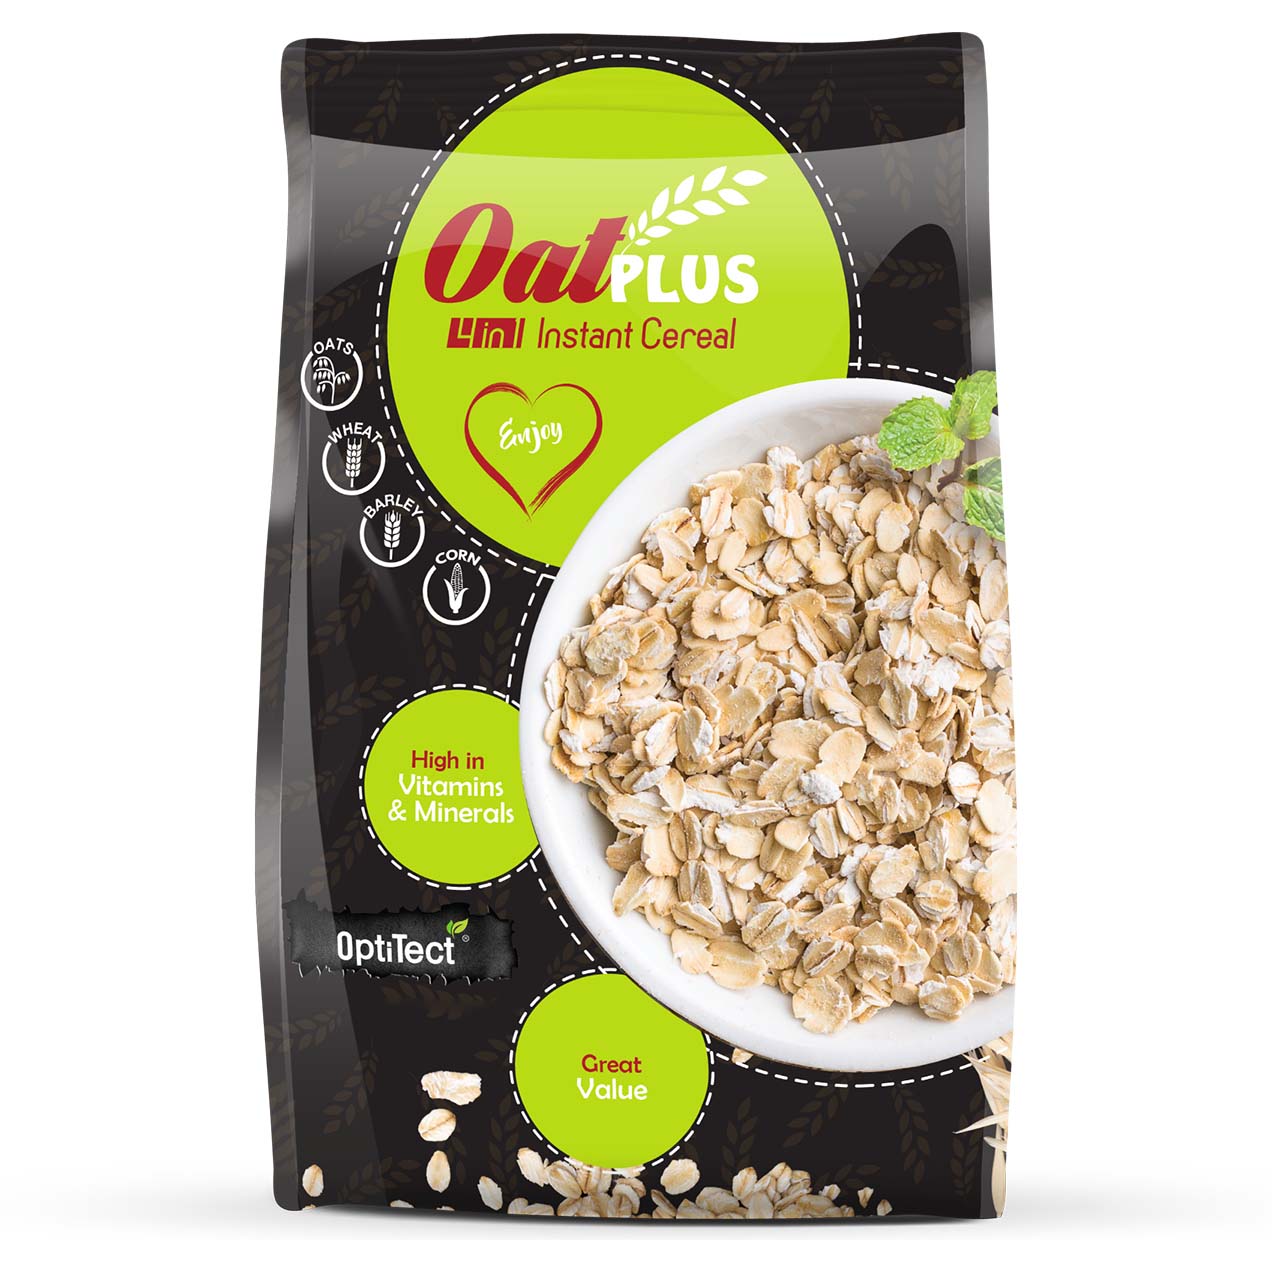 Optitect Oat Plus 4 in 1 Instant Cereal, 20 Sachets